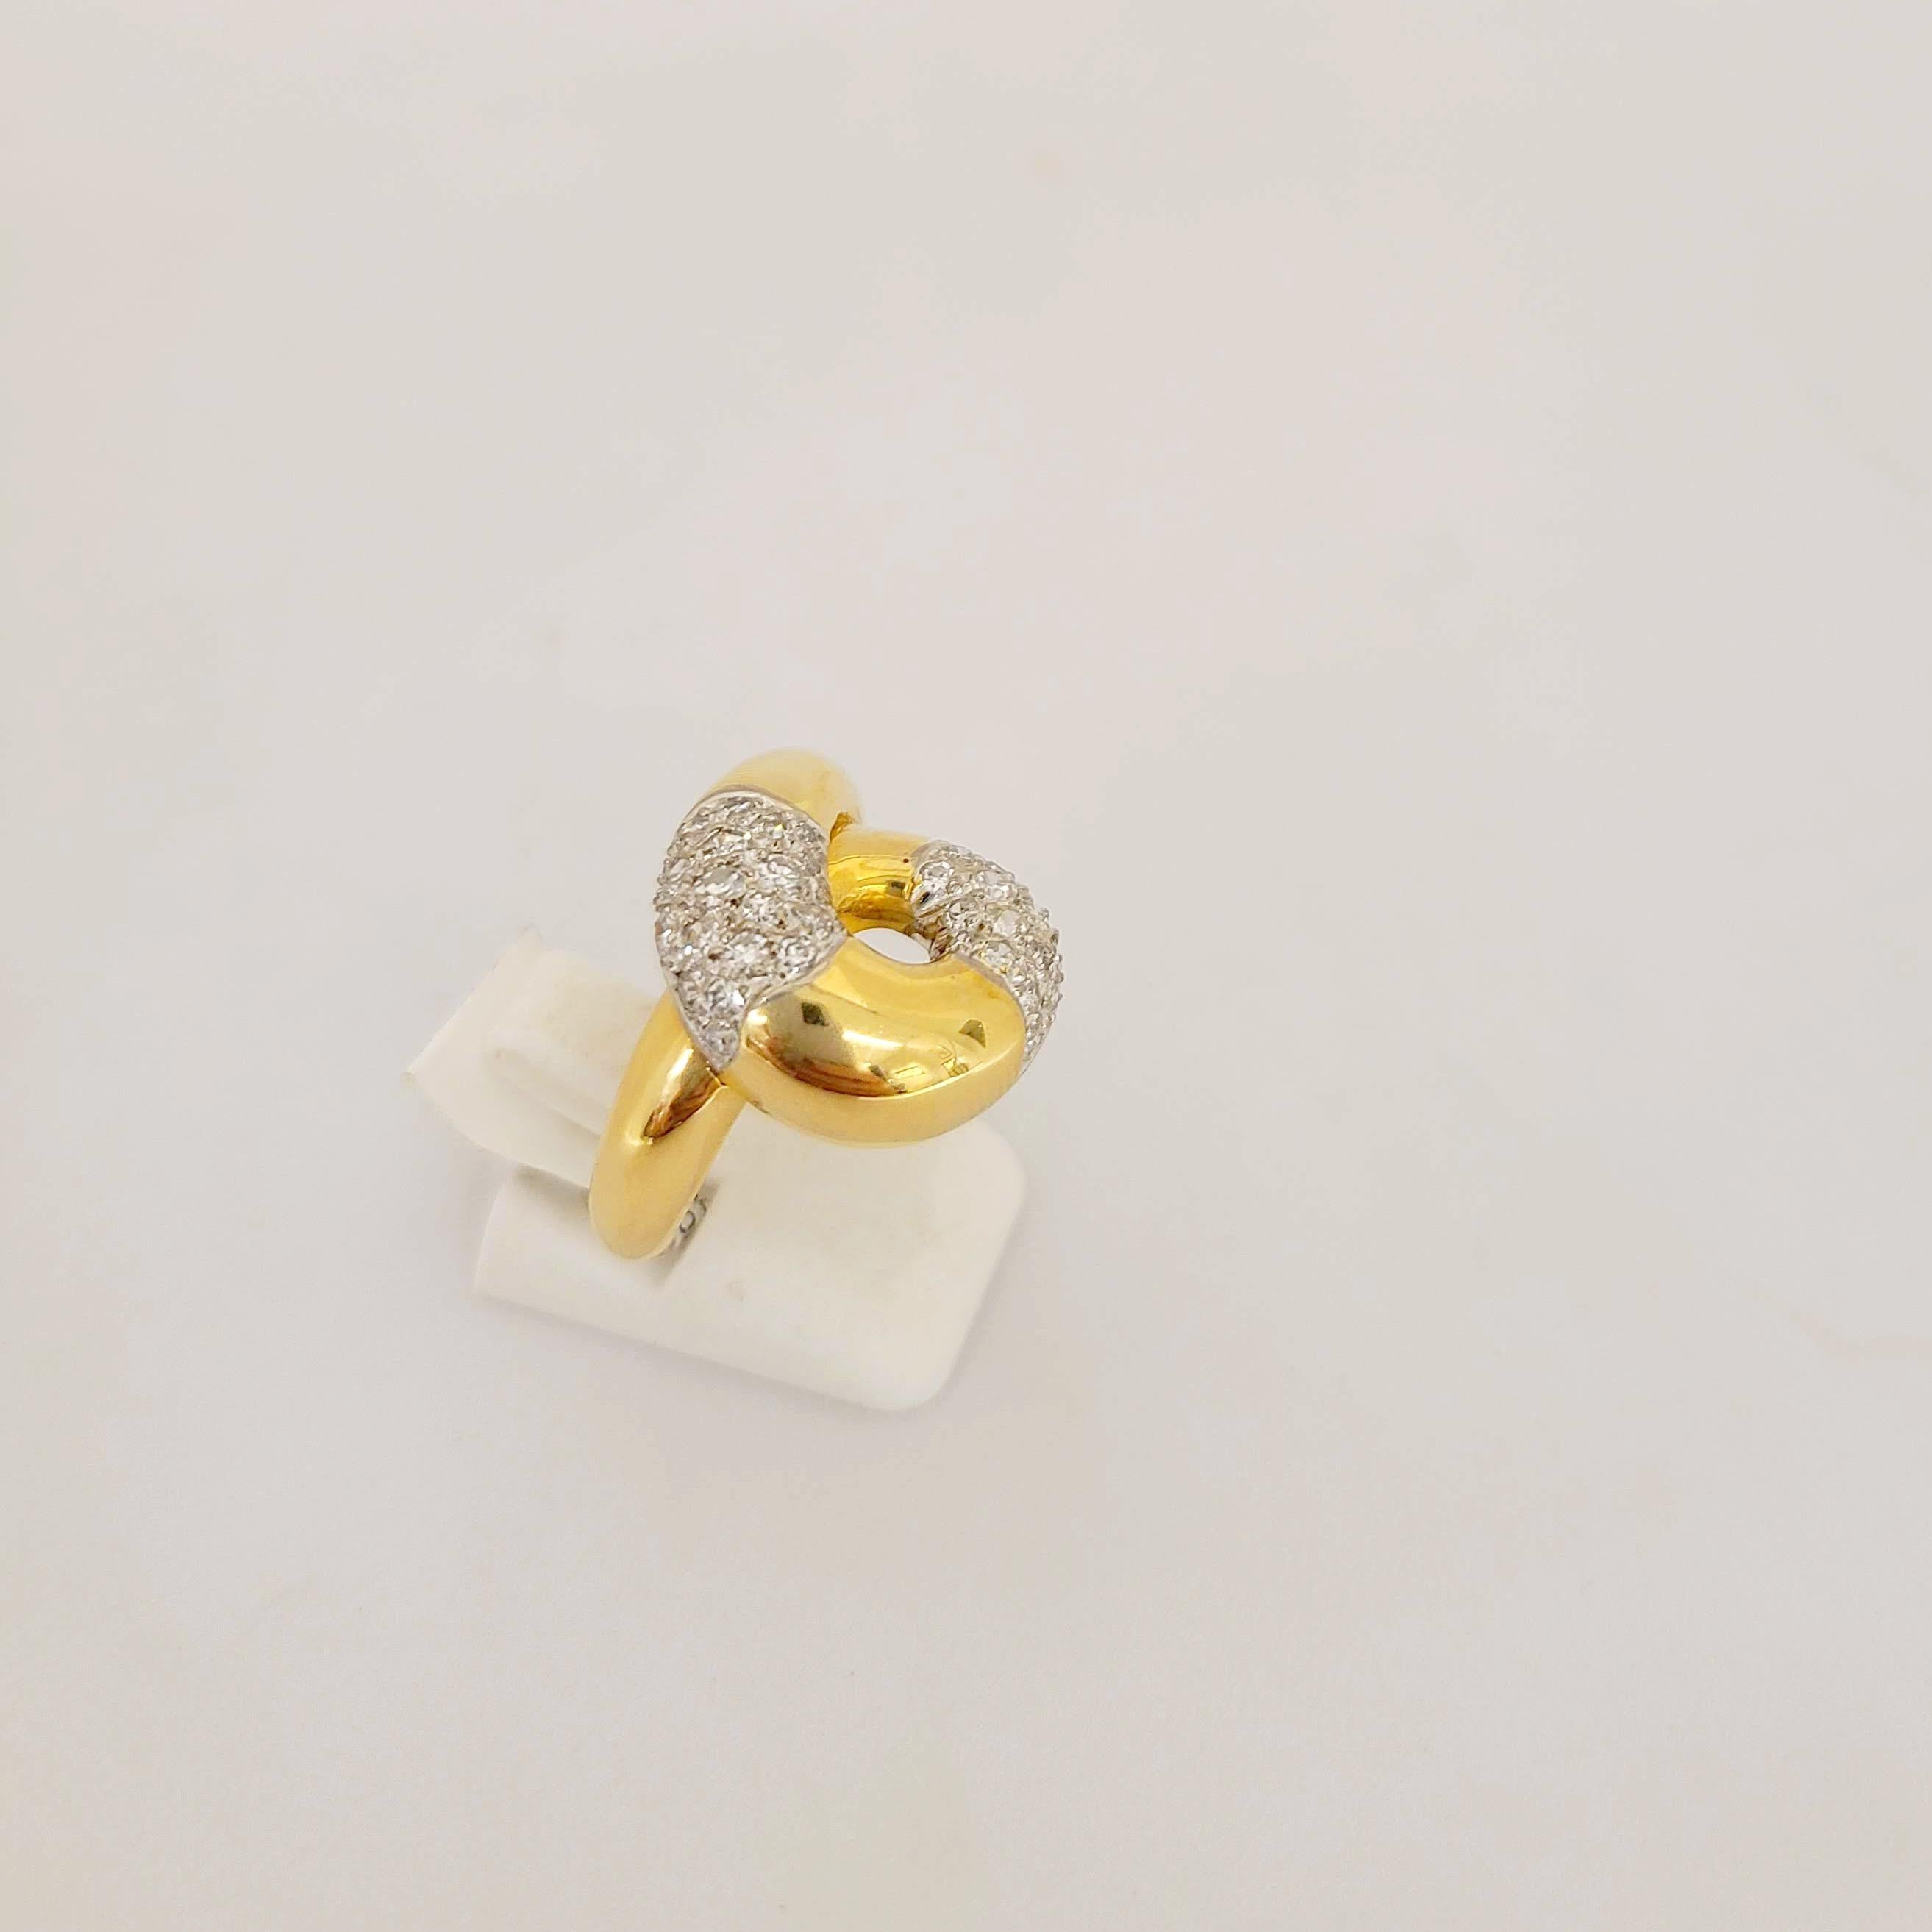 This 18 karat yellow gold ring is designed with a high polished swirl set with 0.80 carats of diamonds.
Ring size 7 3/4   sizing options are available.
